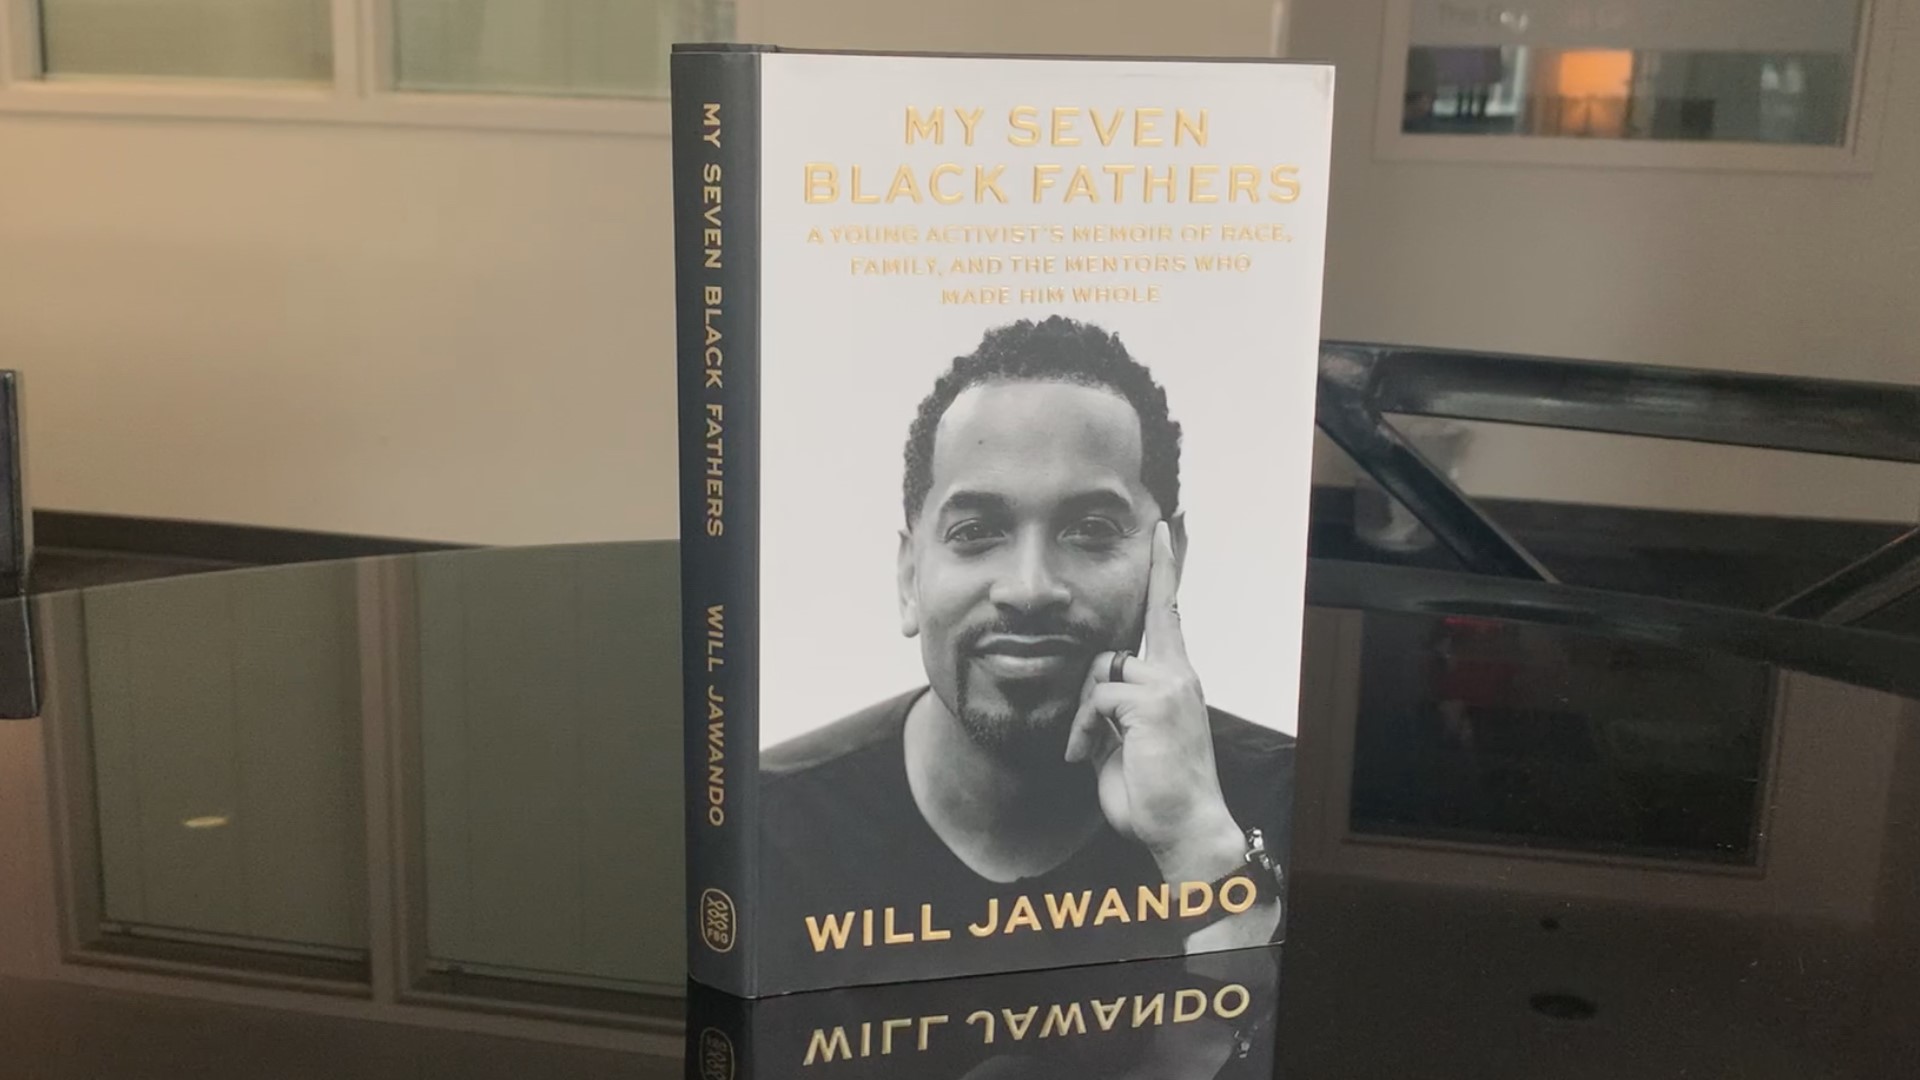 Councilmember Will Jawando shares his story in his new book about the men who played key roles in his upbringing.